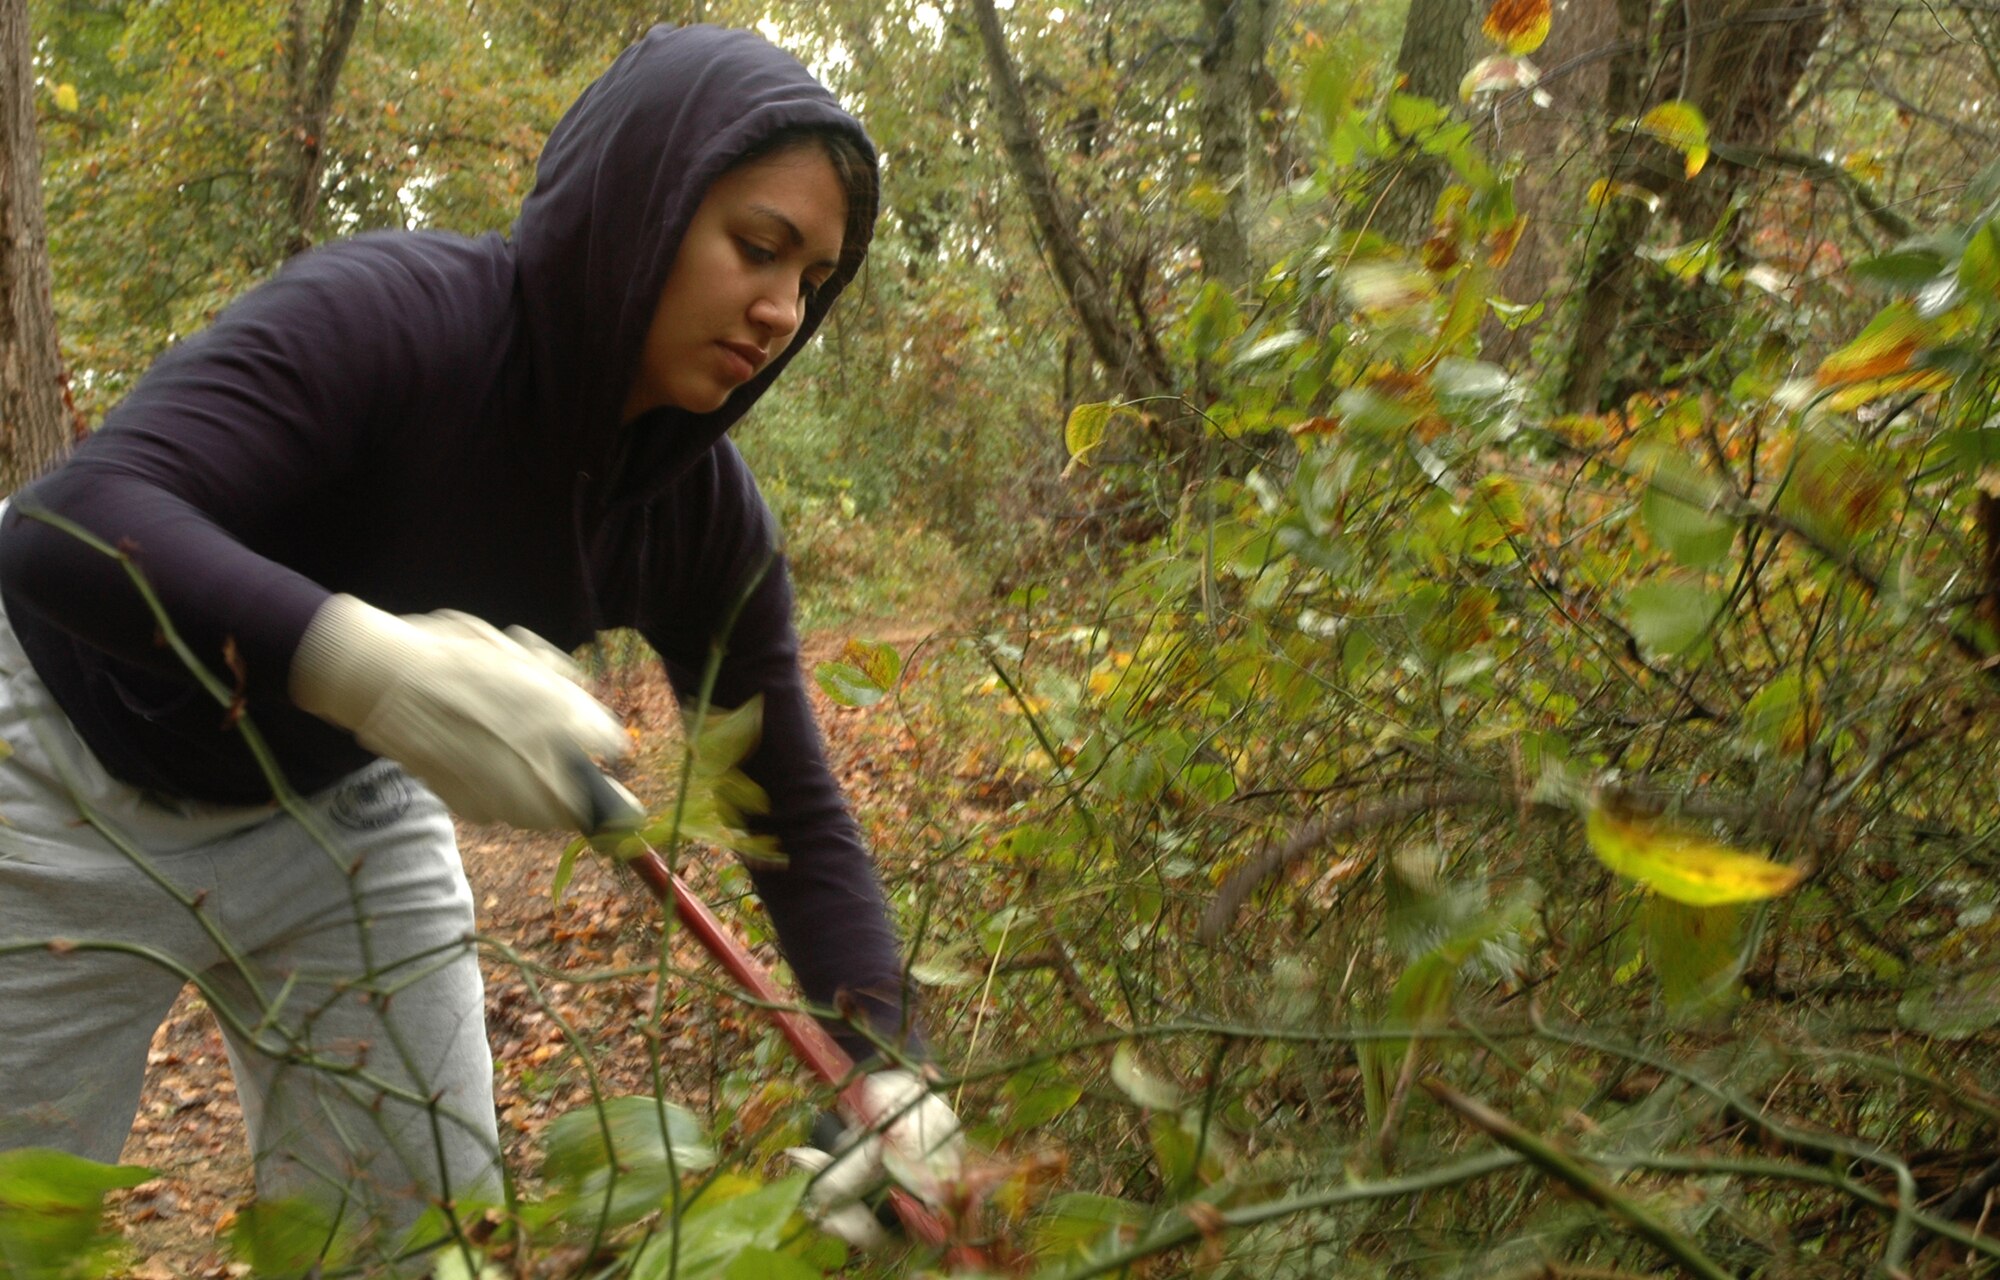 Airman 1st Class Lorena Montoya, 11th Mission Support Squadron, prunes shrubs and other invasive plants along a walking trail Oct. 25 at Kenilworth Aquatic Garden in Washington.  Airman Montoya was one of 176 servicemembers who volunteered at KAQ as part of a joint service project for national “Make a Difference Day.”